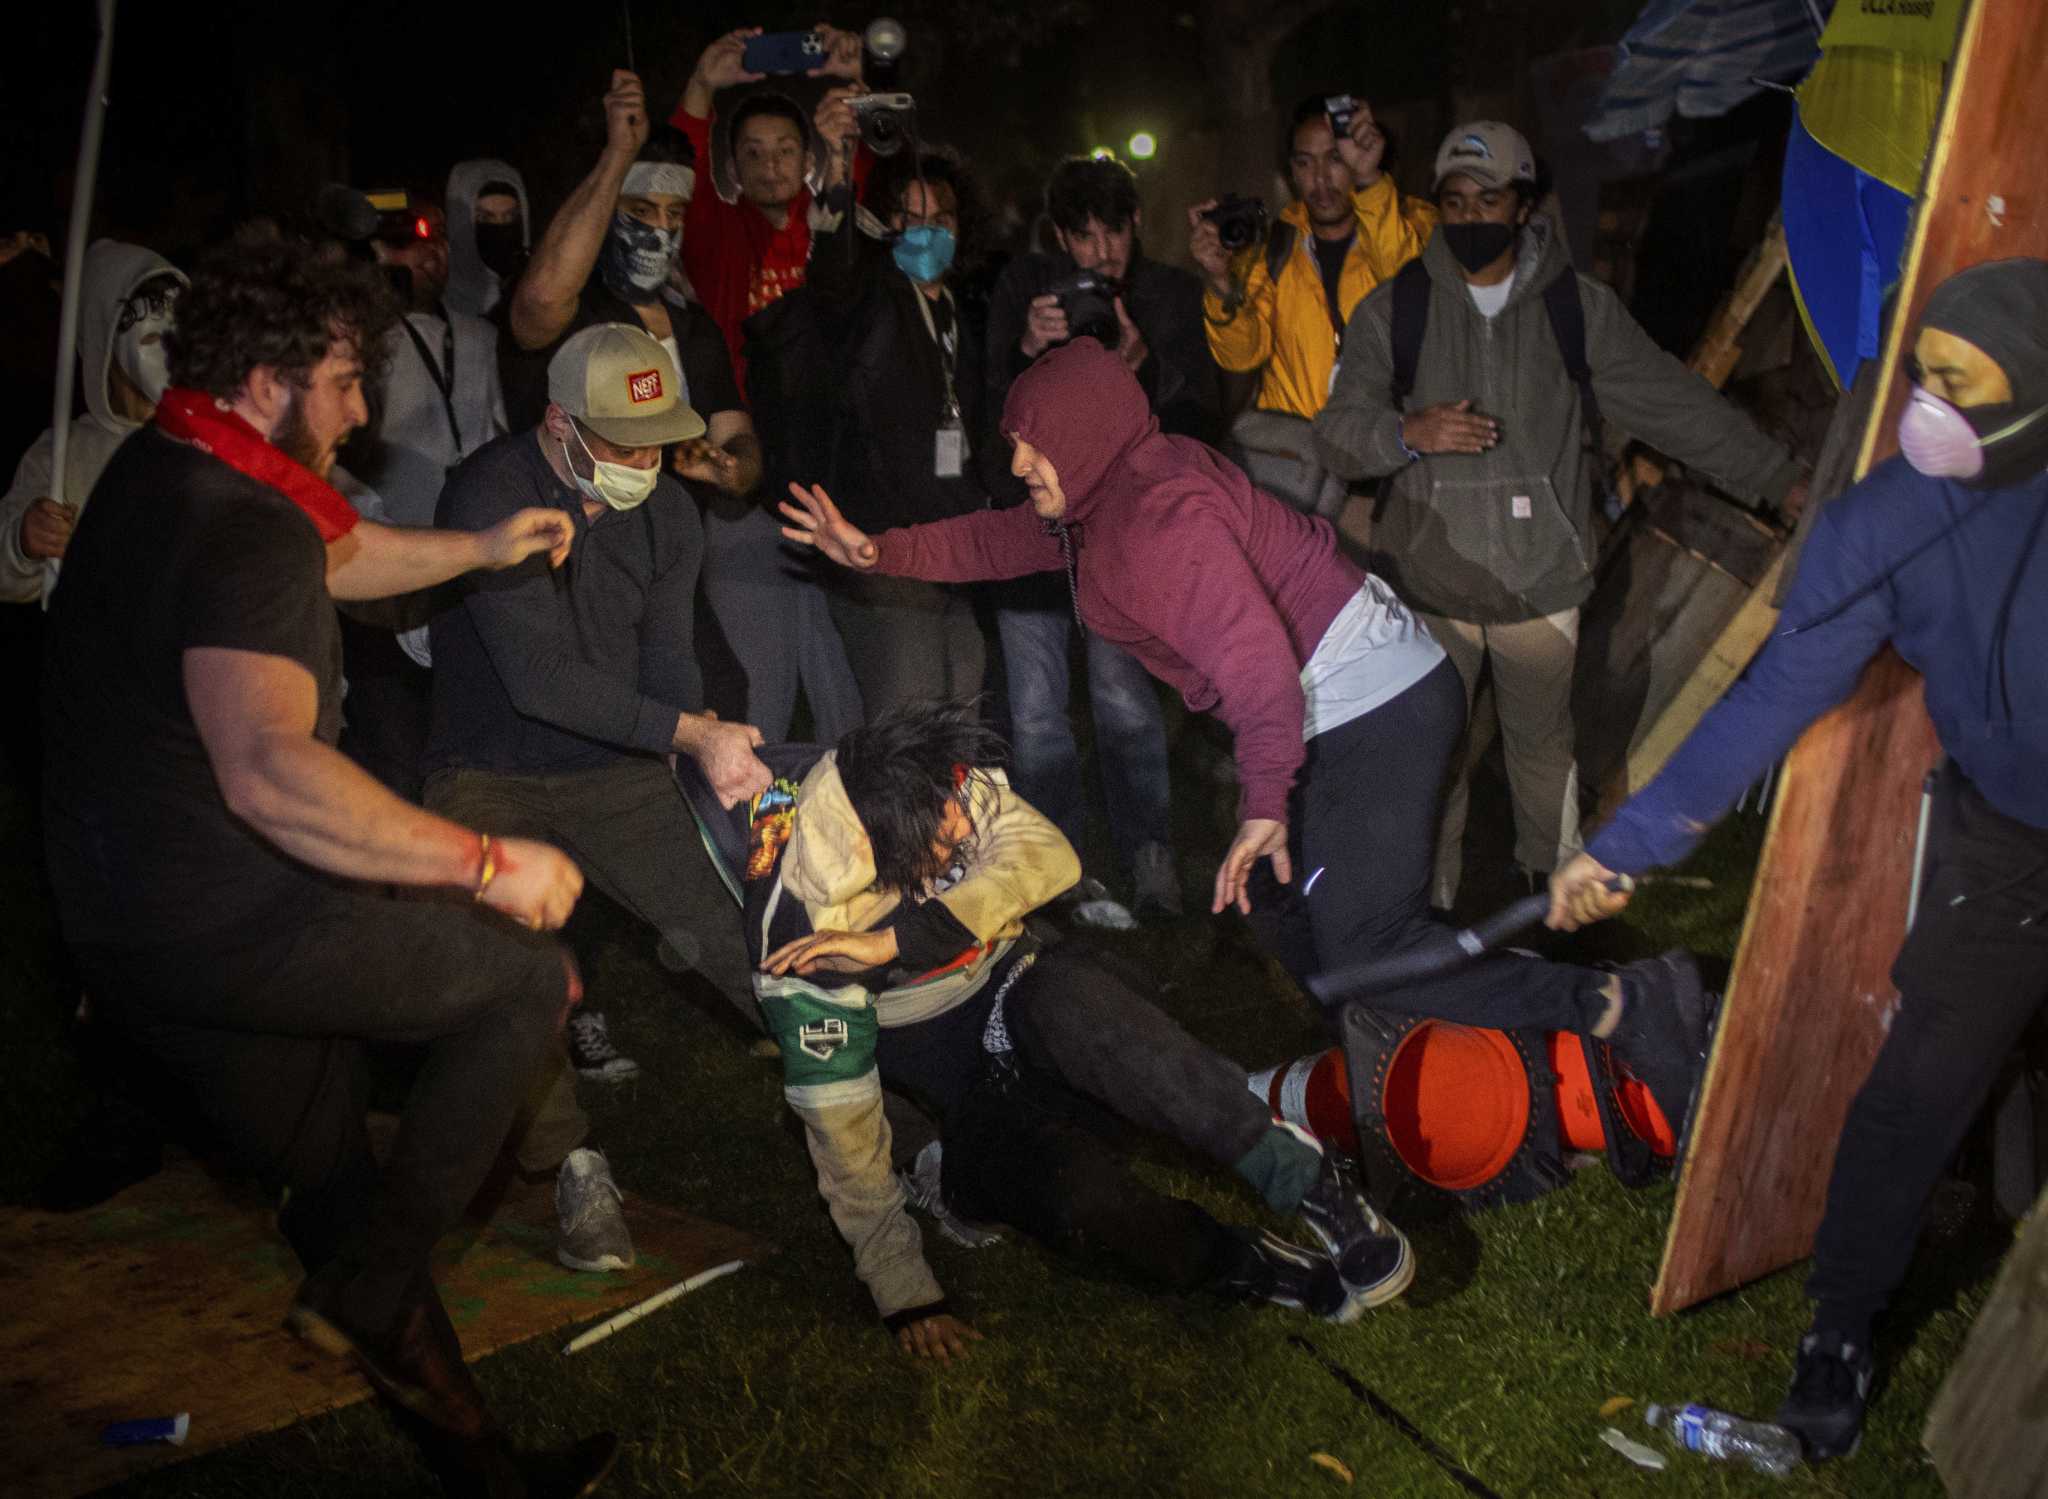 UCLA cancels classes after violence erupts on campus over the war in Gaza